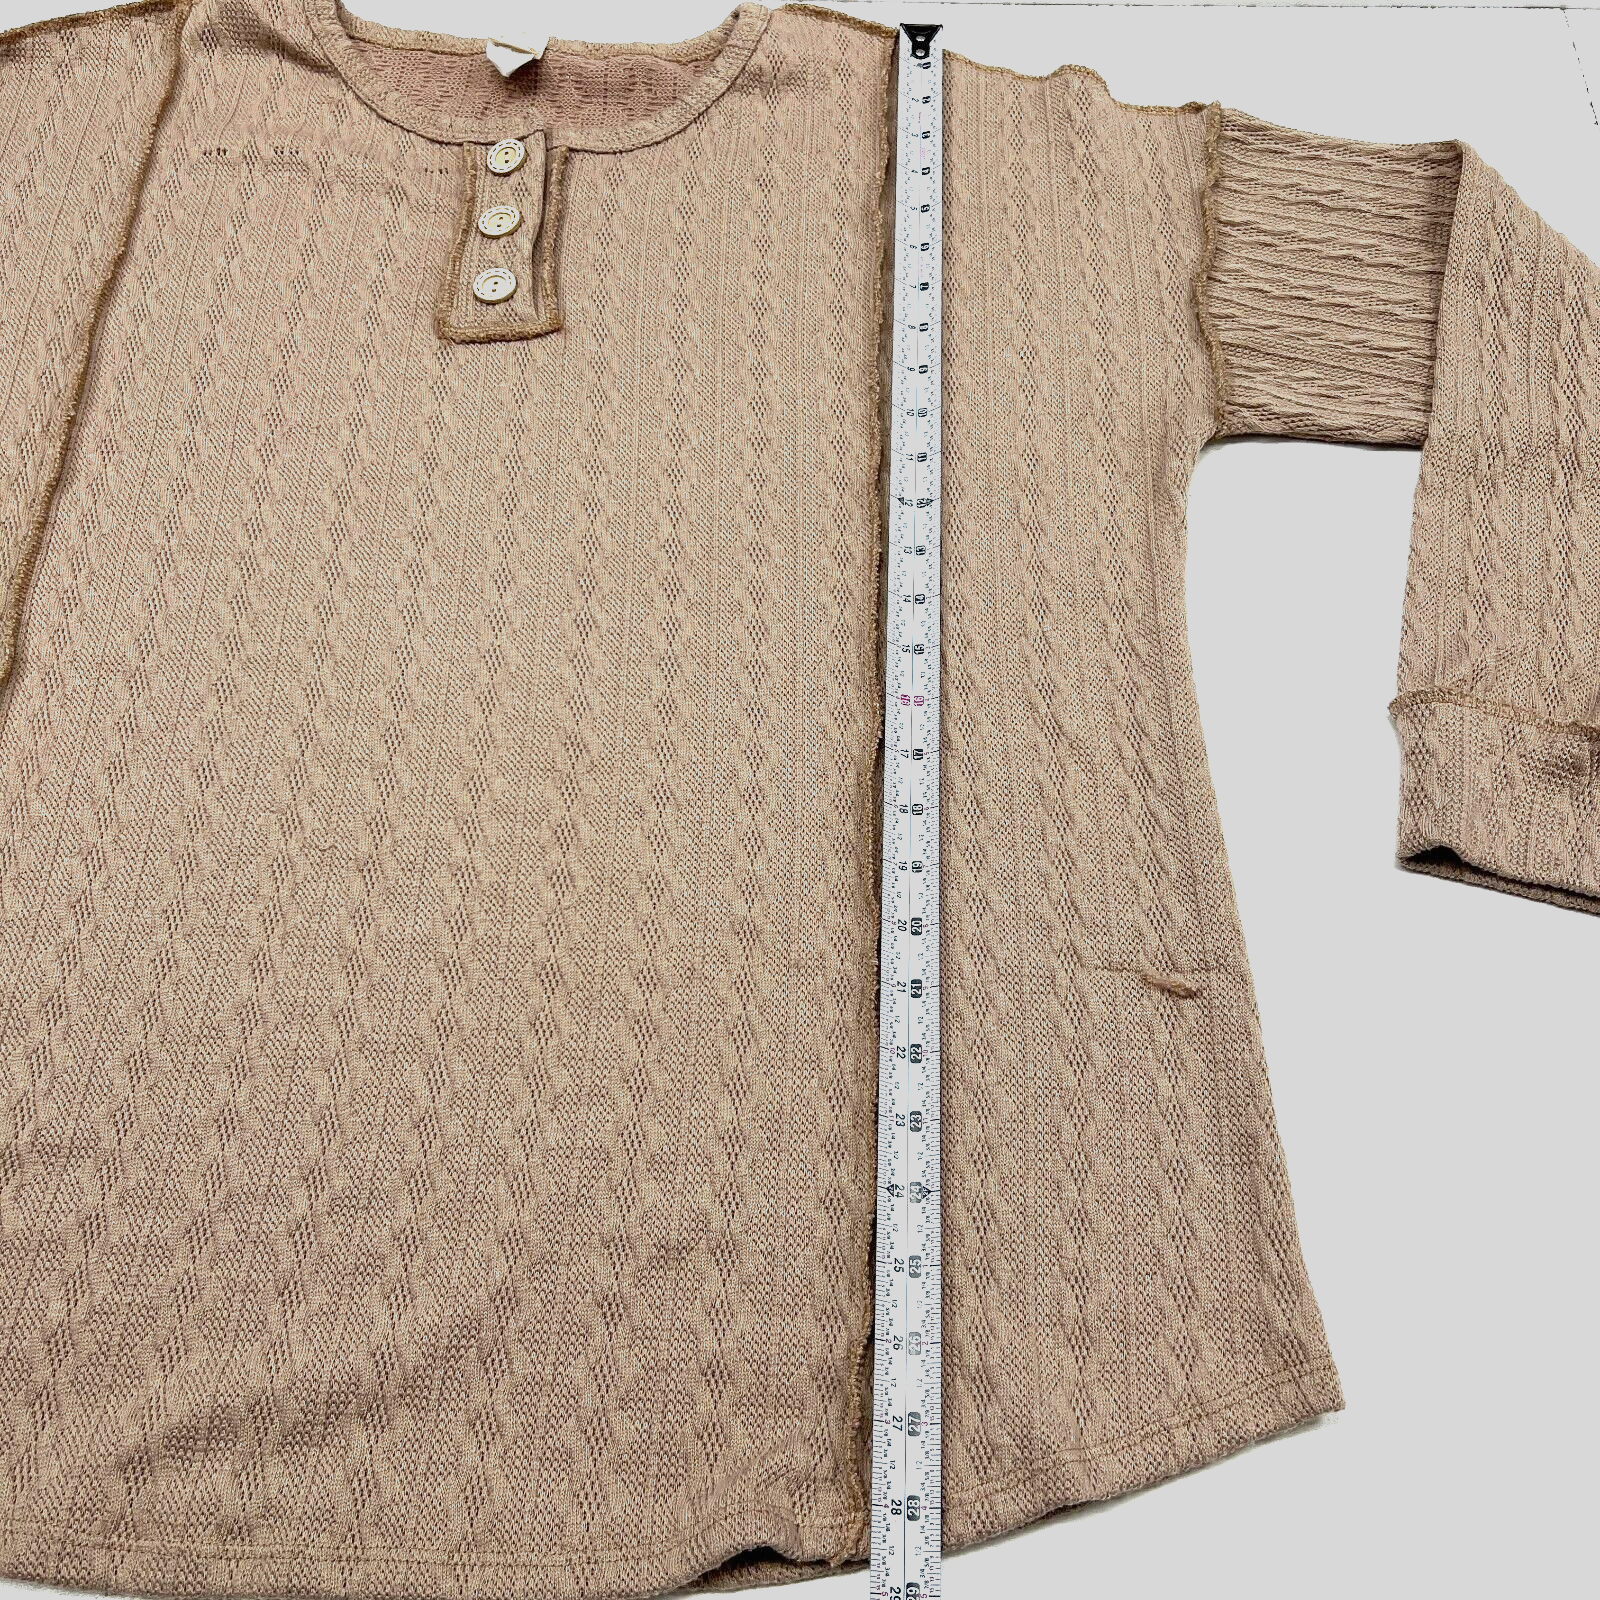 7th Ray Sweater Beige Tan Sandy Brown Buttons Unsized 54 in 3X See Measurements